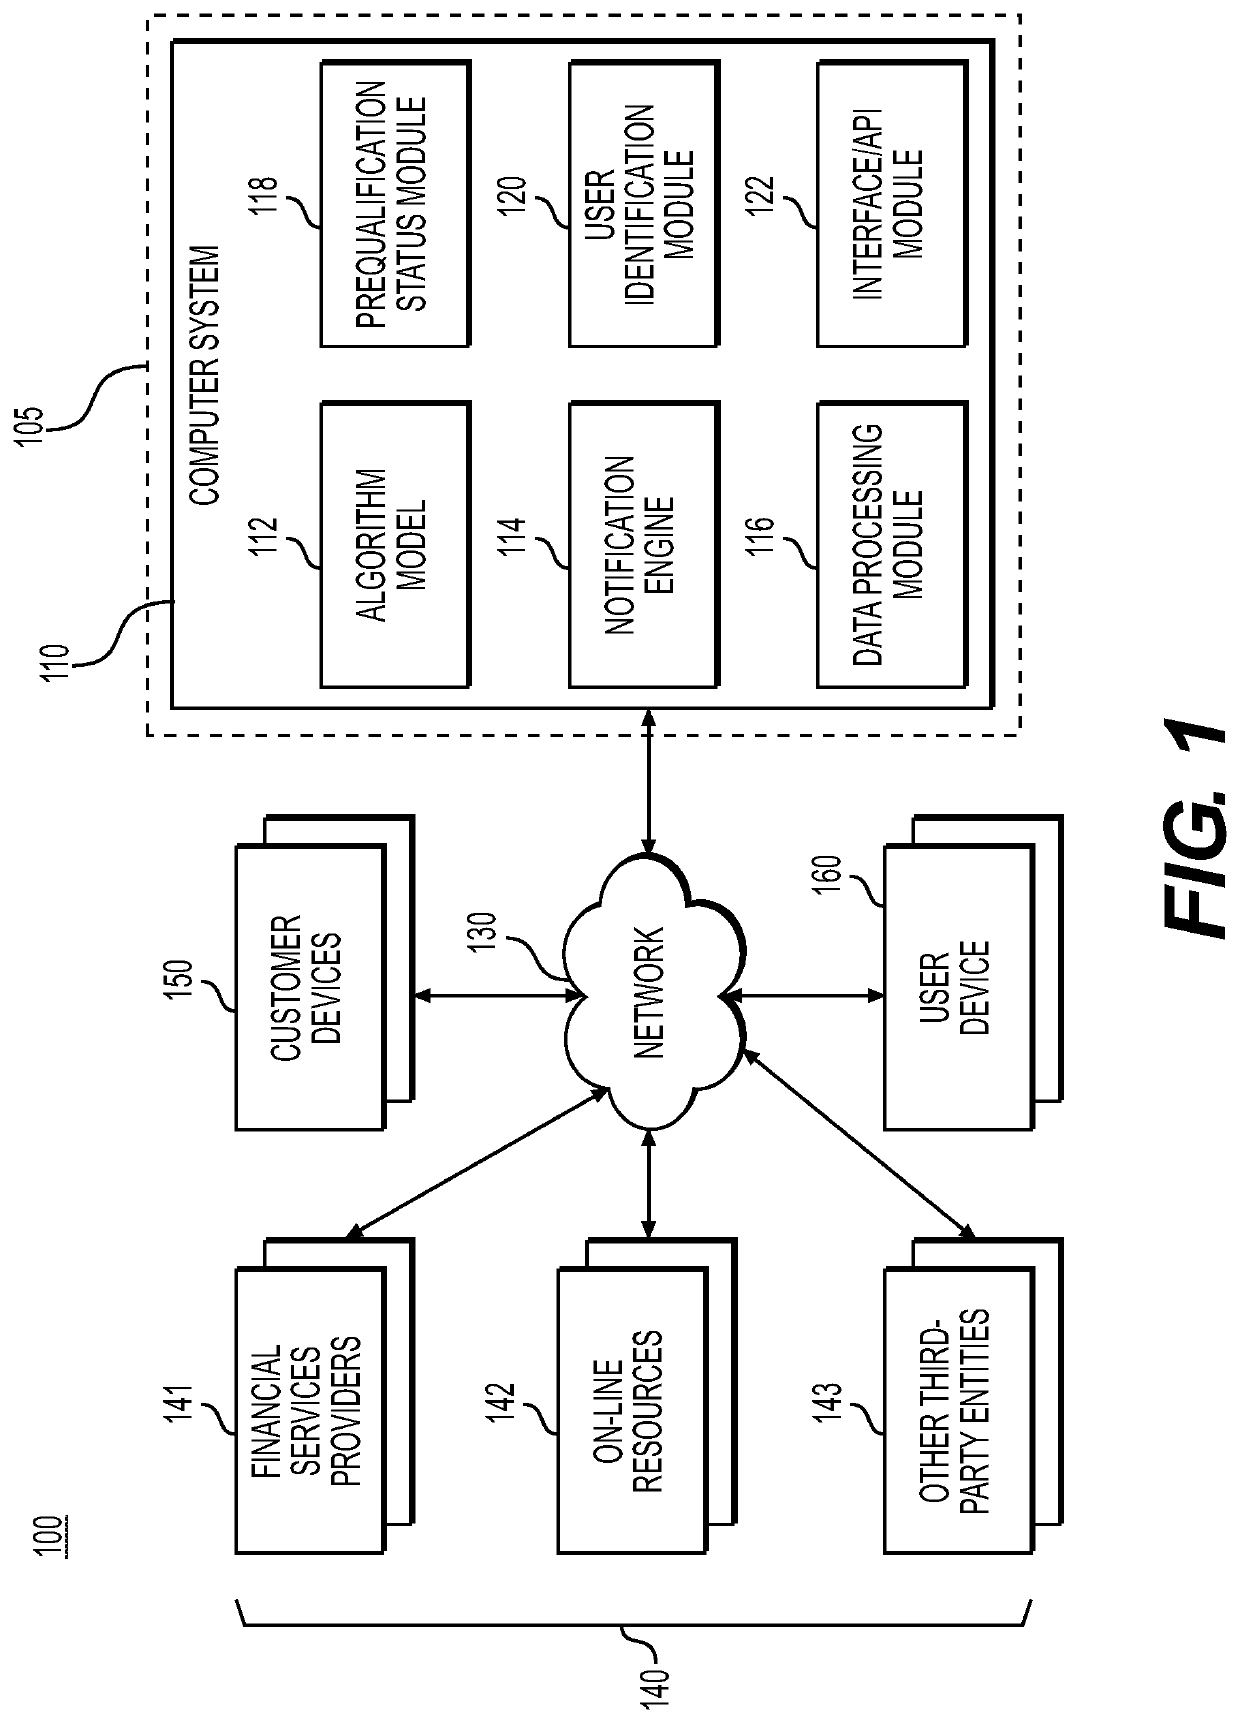 Methods and systems for updating a user interface based on level of user interest